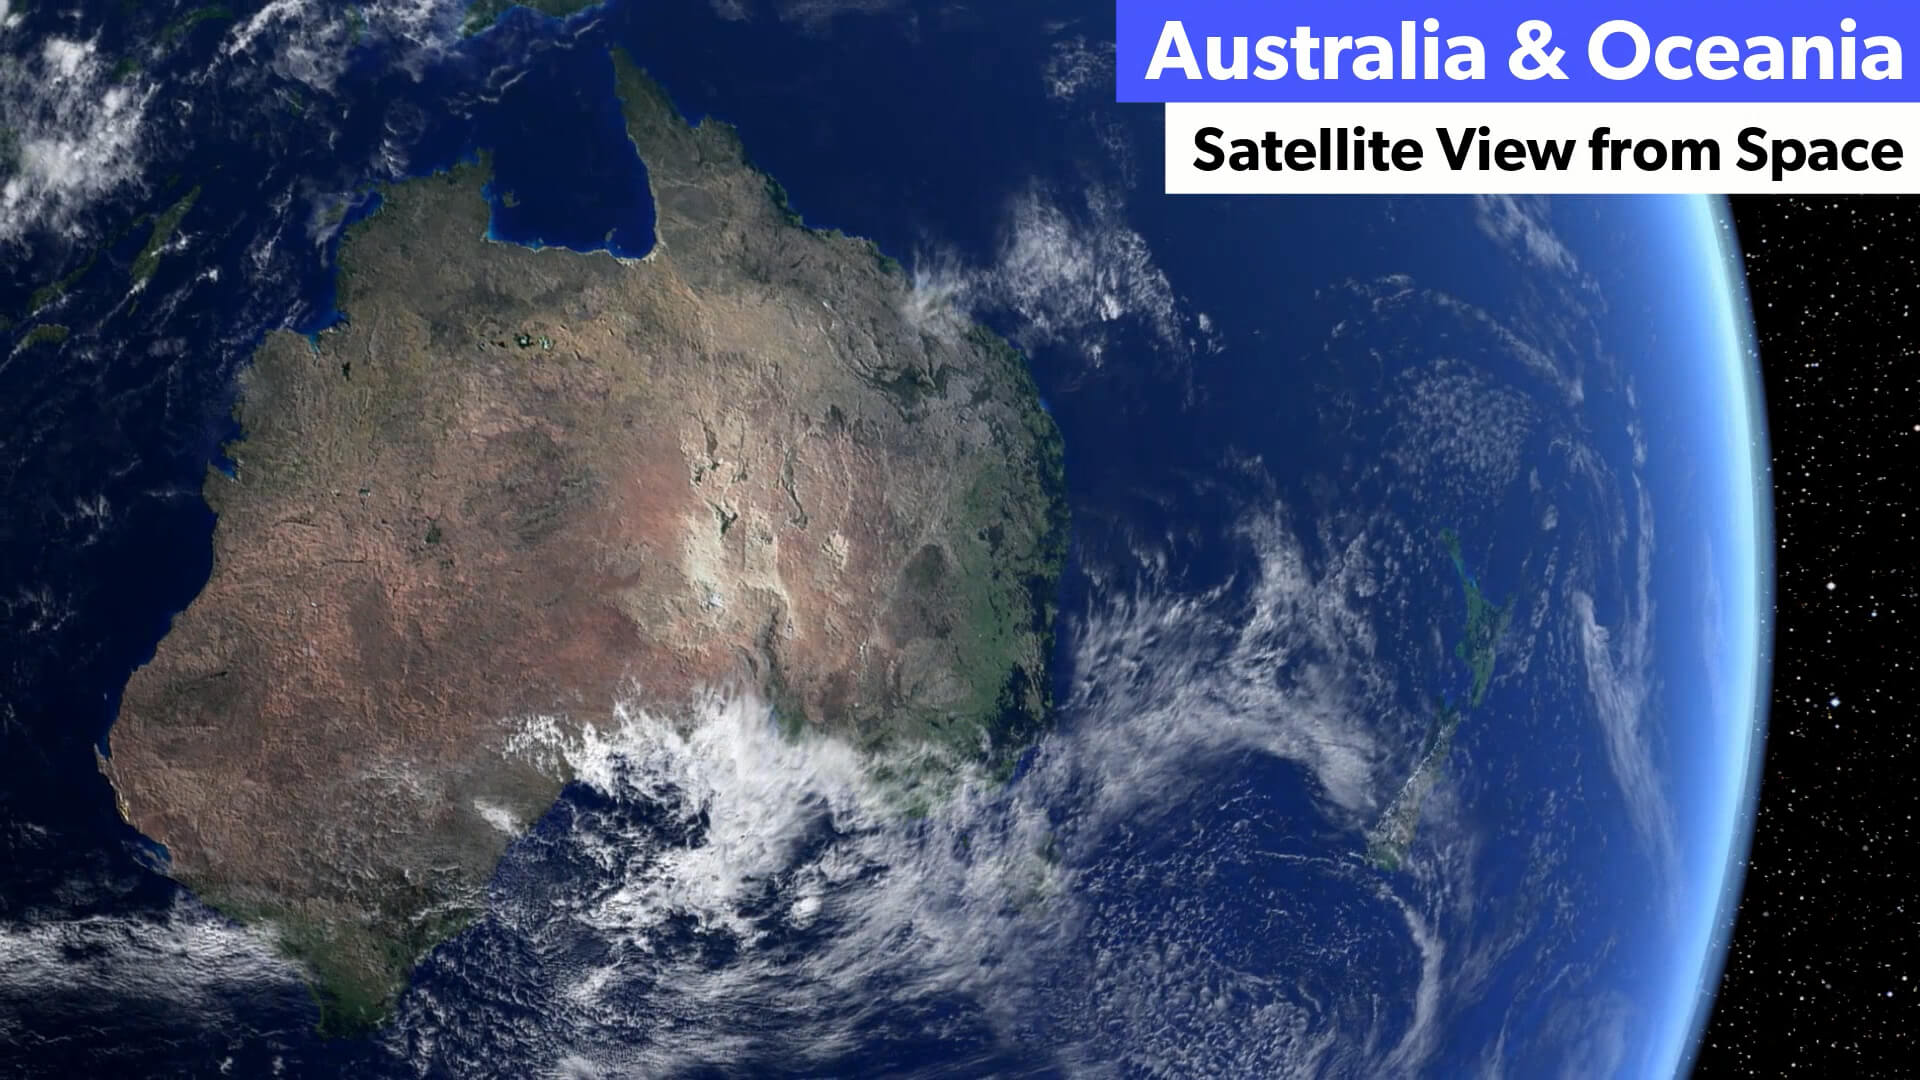 Australia and Oceania Satellite View from Space